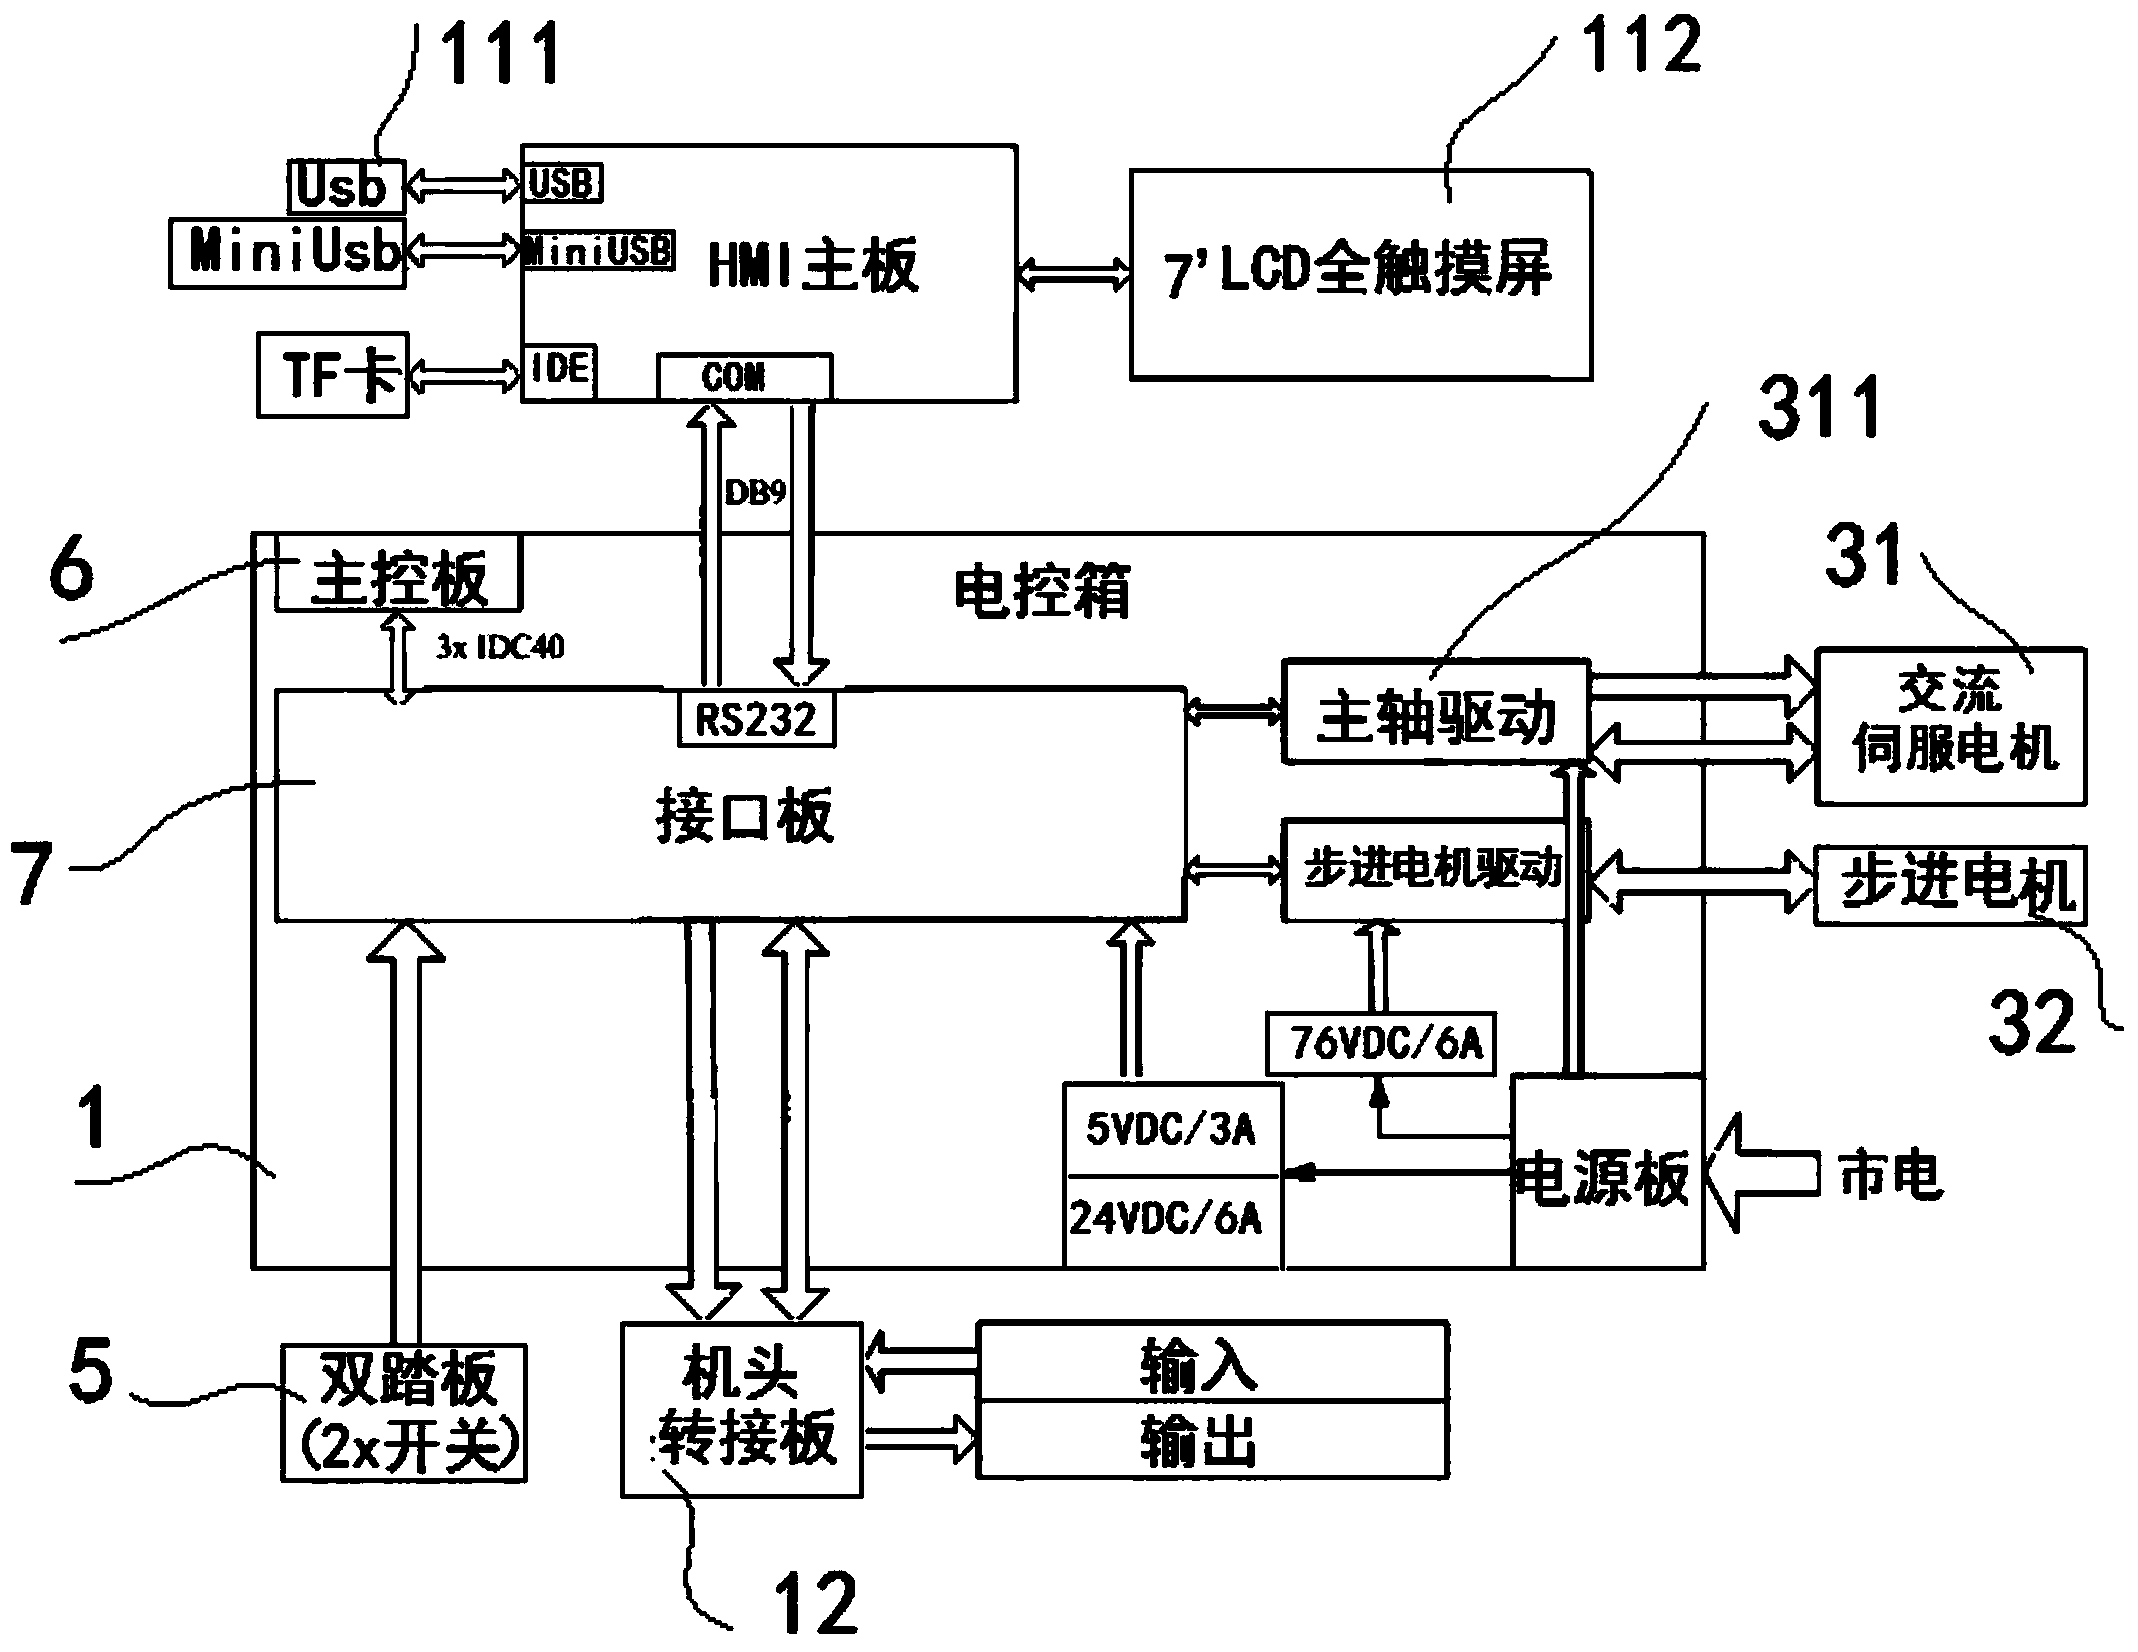 Intelligent control system of pattern sewing machine